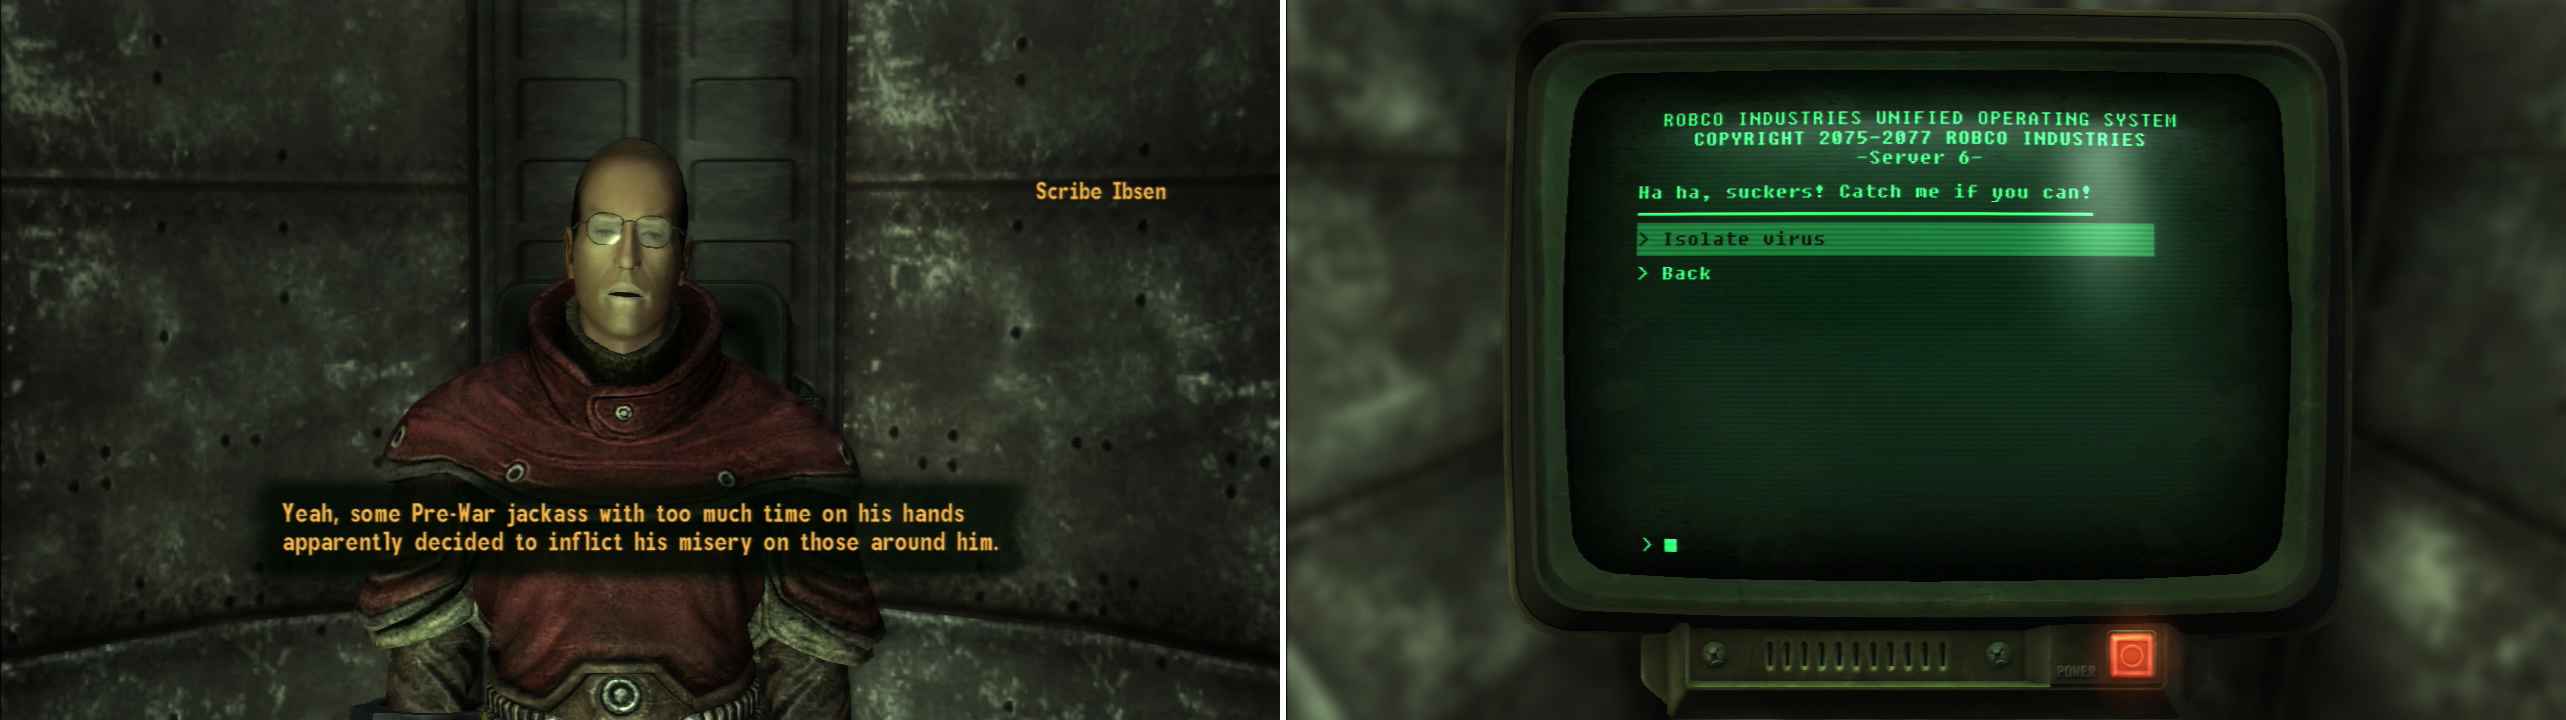 Talk to Scribe Ibsen to learn that even the Brotherhood suffers from the scourge of computer viruses (left). Quickly access the terminals and isolate the virus on the infected terminals (right). Get all three parts locked down and you’ll be good to go.